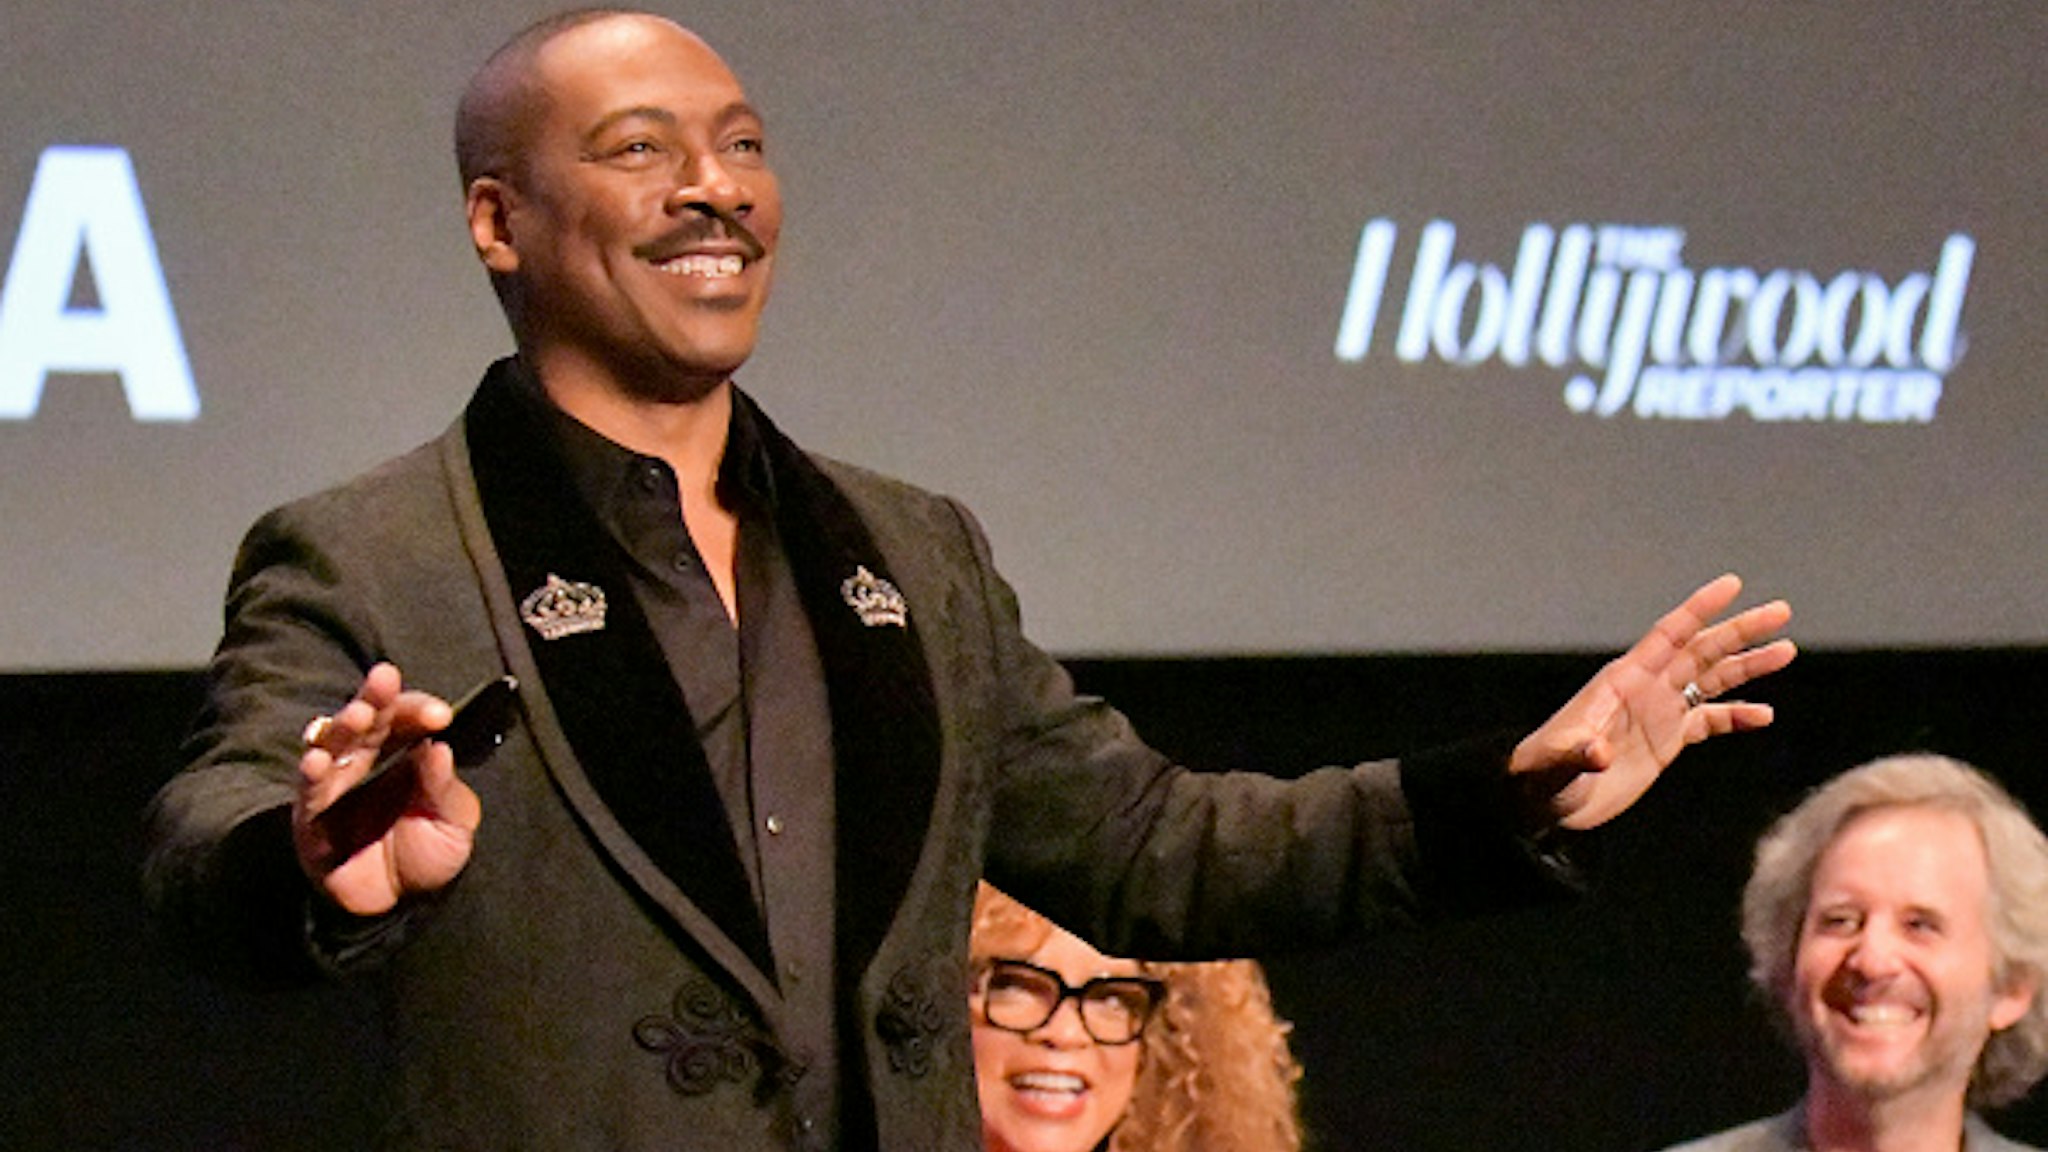 LOS ANGELES, CALIFORNIA - DECEMBER 02: Eddie Murphy speaks on stage at the Hammer Museum Los Angeles Presents MoMA Contenders 2019 Screening and Q&amp;A of "Dolemite Is My Name" at Hammer Museum on December 02, 2019 in Los Angeles, California.